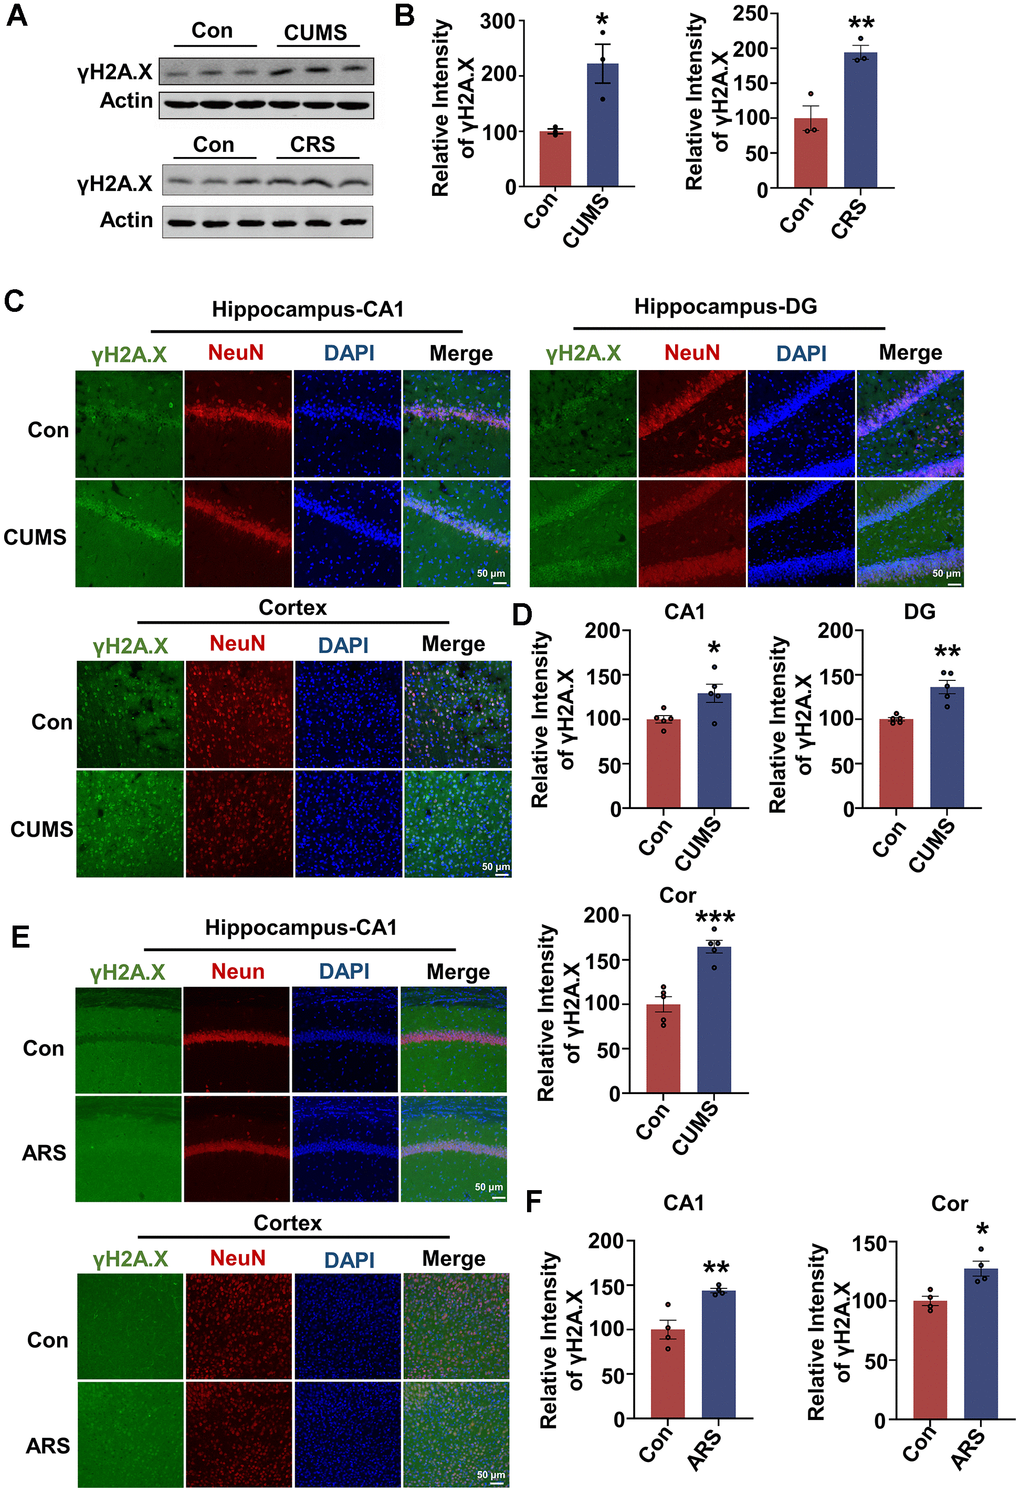 Acute and chronic stress induce DNA damage in animal models. (A) Representative immunoblots of γH2A.X and β-actin in hippocampal tissues from chronic unpredictable mild stress (CUMS), chronic restraint stress (CRS) model and control animals. (B) Quantification of the relative protein levels of γH2A.X, which were normalized to the β-actin levels. n = 3 per group. (C) Representative fluorescence images of γH2A.X (green), NeuN (red) and DAPI (blue) in hippocampus (CA1 and DG region) and cortex in CUMS rats. Scale bar: 50 μm. (D) Quantitative analysis of the fluorescence intensity of γH2A.X in C. n = 5 per group. (E) Representative fluorescence images of γH2A.X (green), NeuN(red) and DAPI (blue) in hippocampal CA1 region and cortex in acute restraint stress (ARS) mice. Scale bar: 50 μm. (F) Quantitative analysis of the fluorescence intensity of γH2A.X in E. n = 4 per group. Data are presented as mean ± SEM. *P P P 